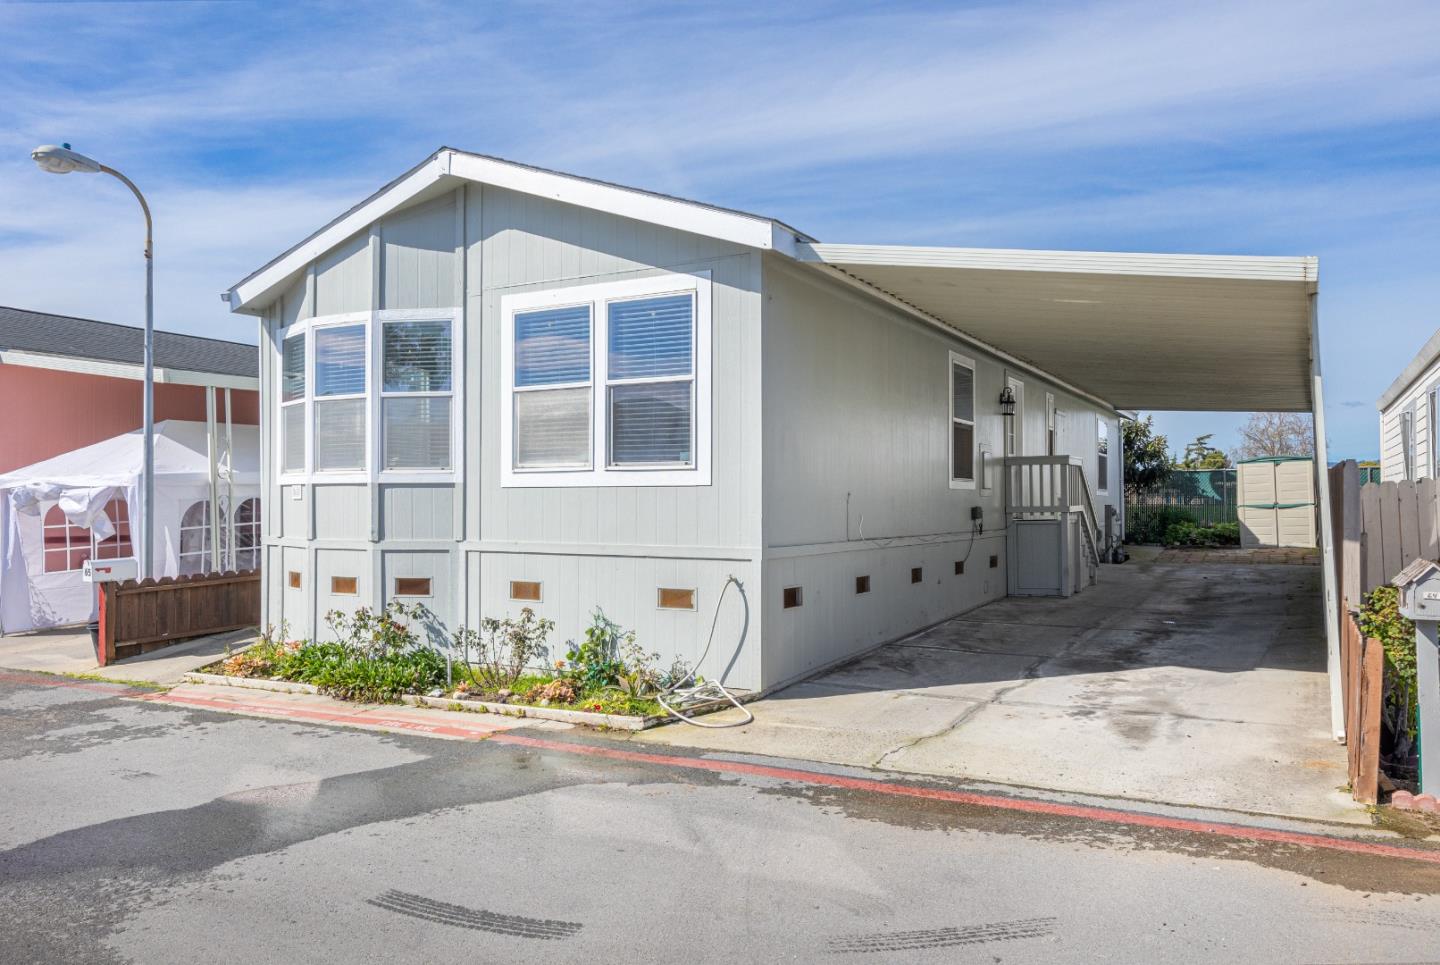 Photo of 501 S Green Valley Rd #65 in Watsonville, CA